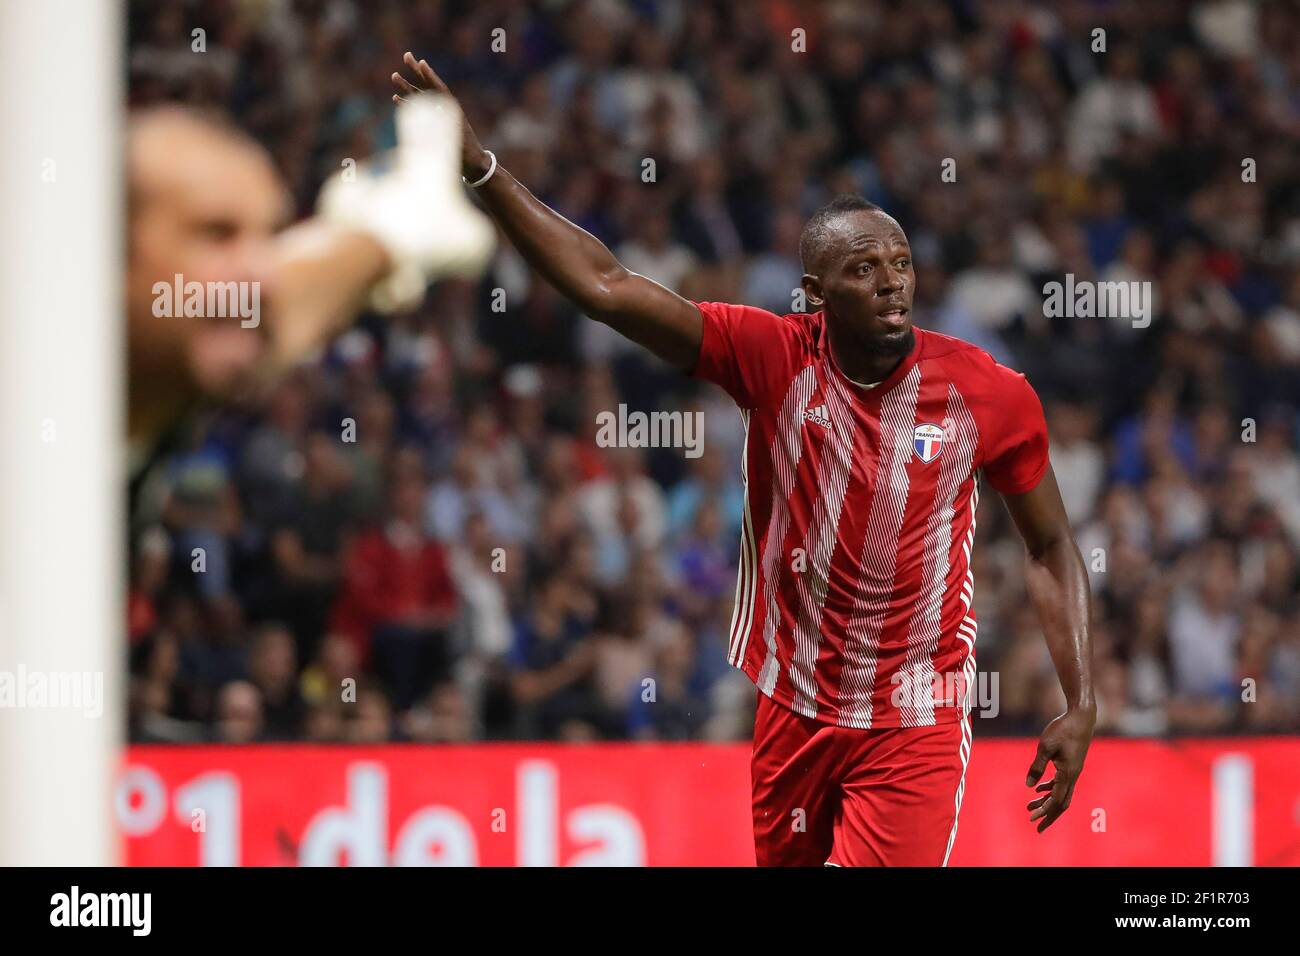 Usain Bolt (FIFA 98), Lionel Charbonnier (France 98) during the 2018 Friendly Game football match between France 98 and FIFA 98 on June 12, 2018 at U Arena in Nanterre near Paris, France - Photo Stephane Allaman / DPPI Stock Photo